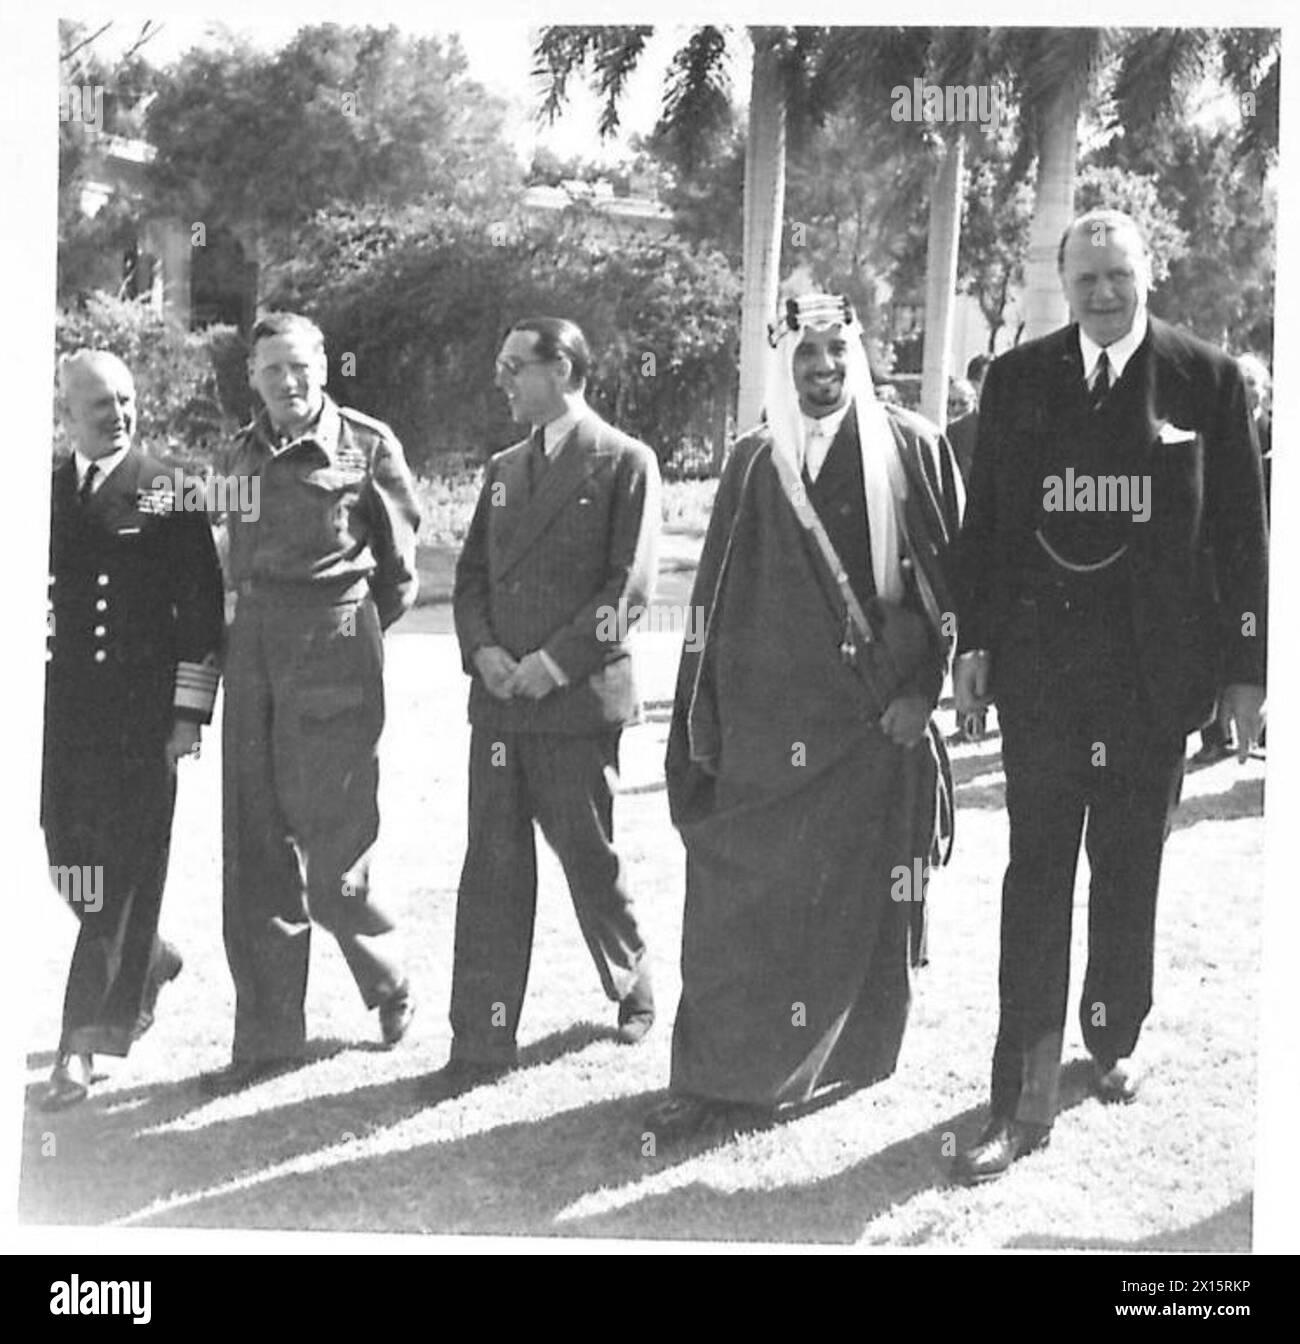 HRH EL EMIR MANSUR IBN SAUD AT THE BRITISH EMBASSY IN CAIRO - Strolling in the Embassy grounds are, left to right:-Admiral Sir Andrew Cunningham, General Sir Claude Auchinleck, Sir Walter Monckton, HRH the Emir Mansur Ibn 'Abd al-'Aziz Bin Saud, Sir Miles Lampson Stock Photo